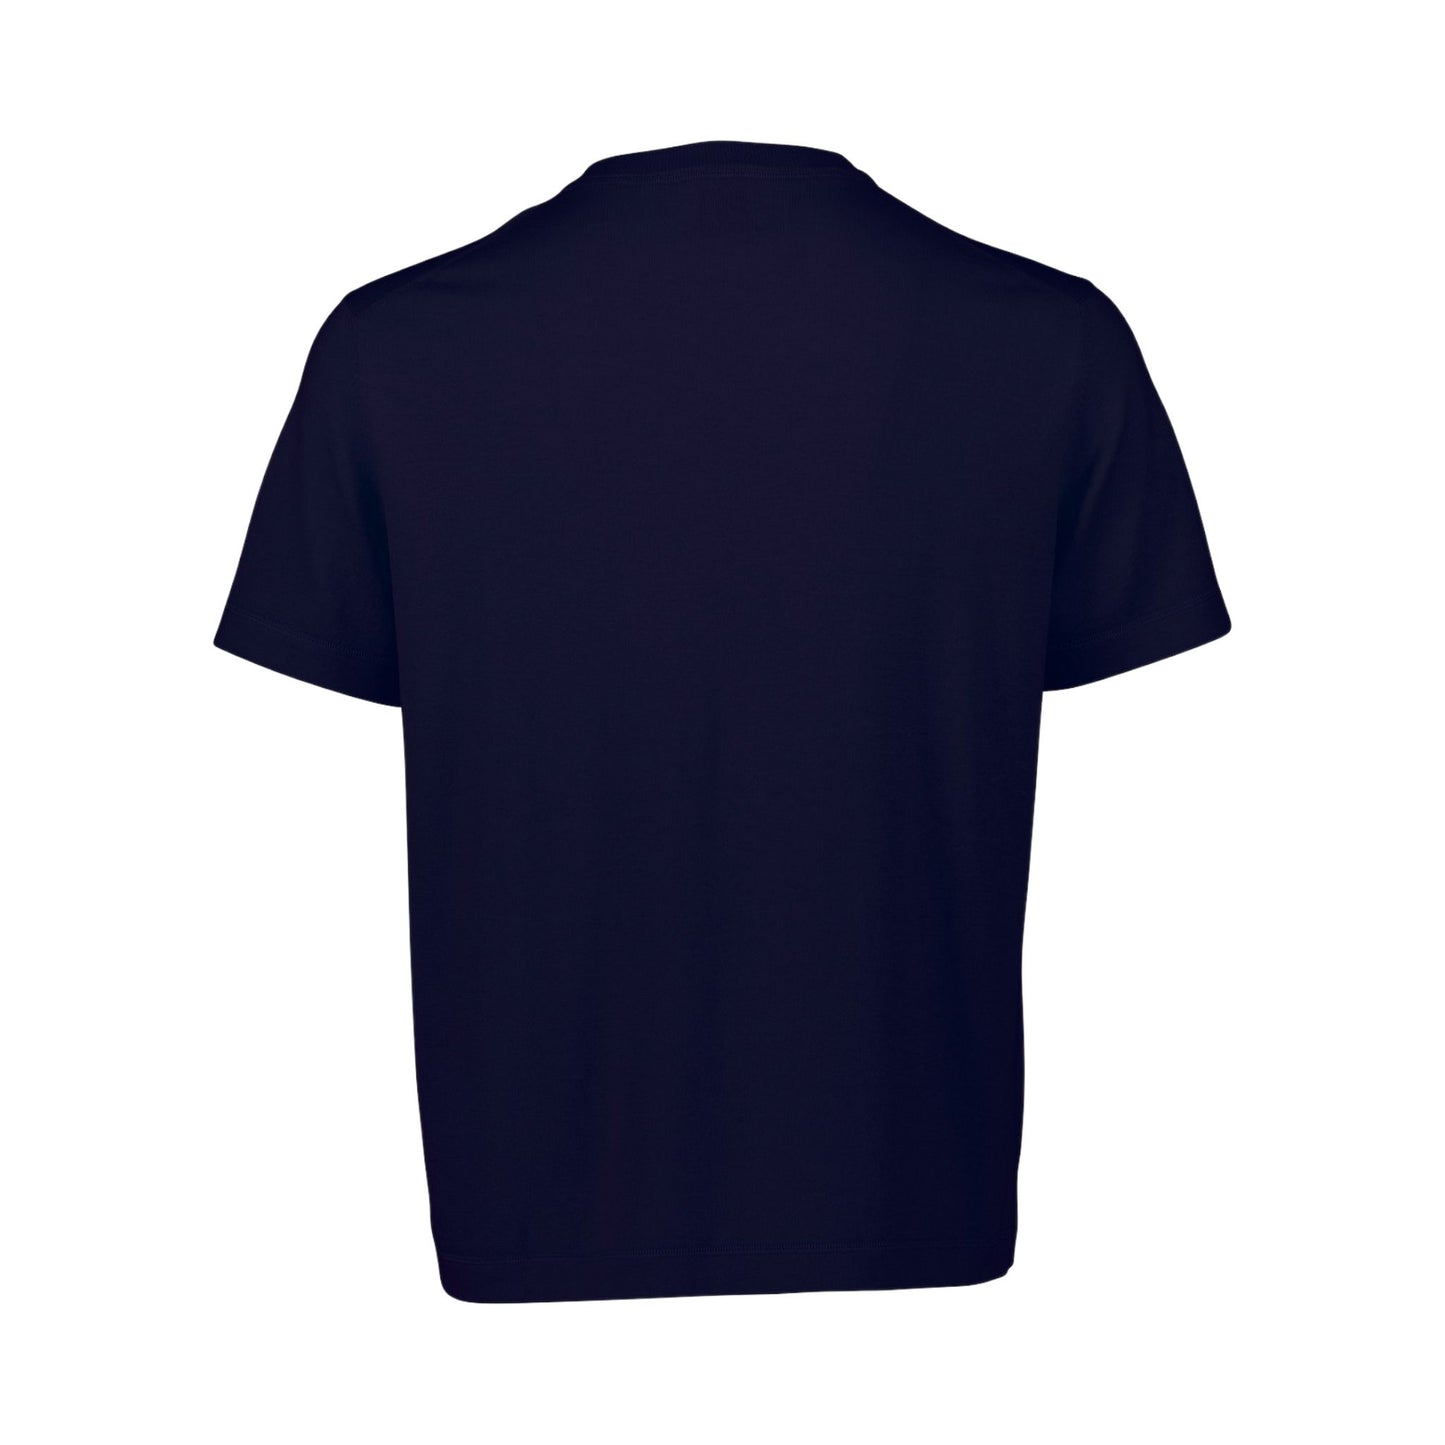 ALLUDE - Flat Knit T-Shirt Navy